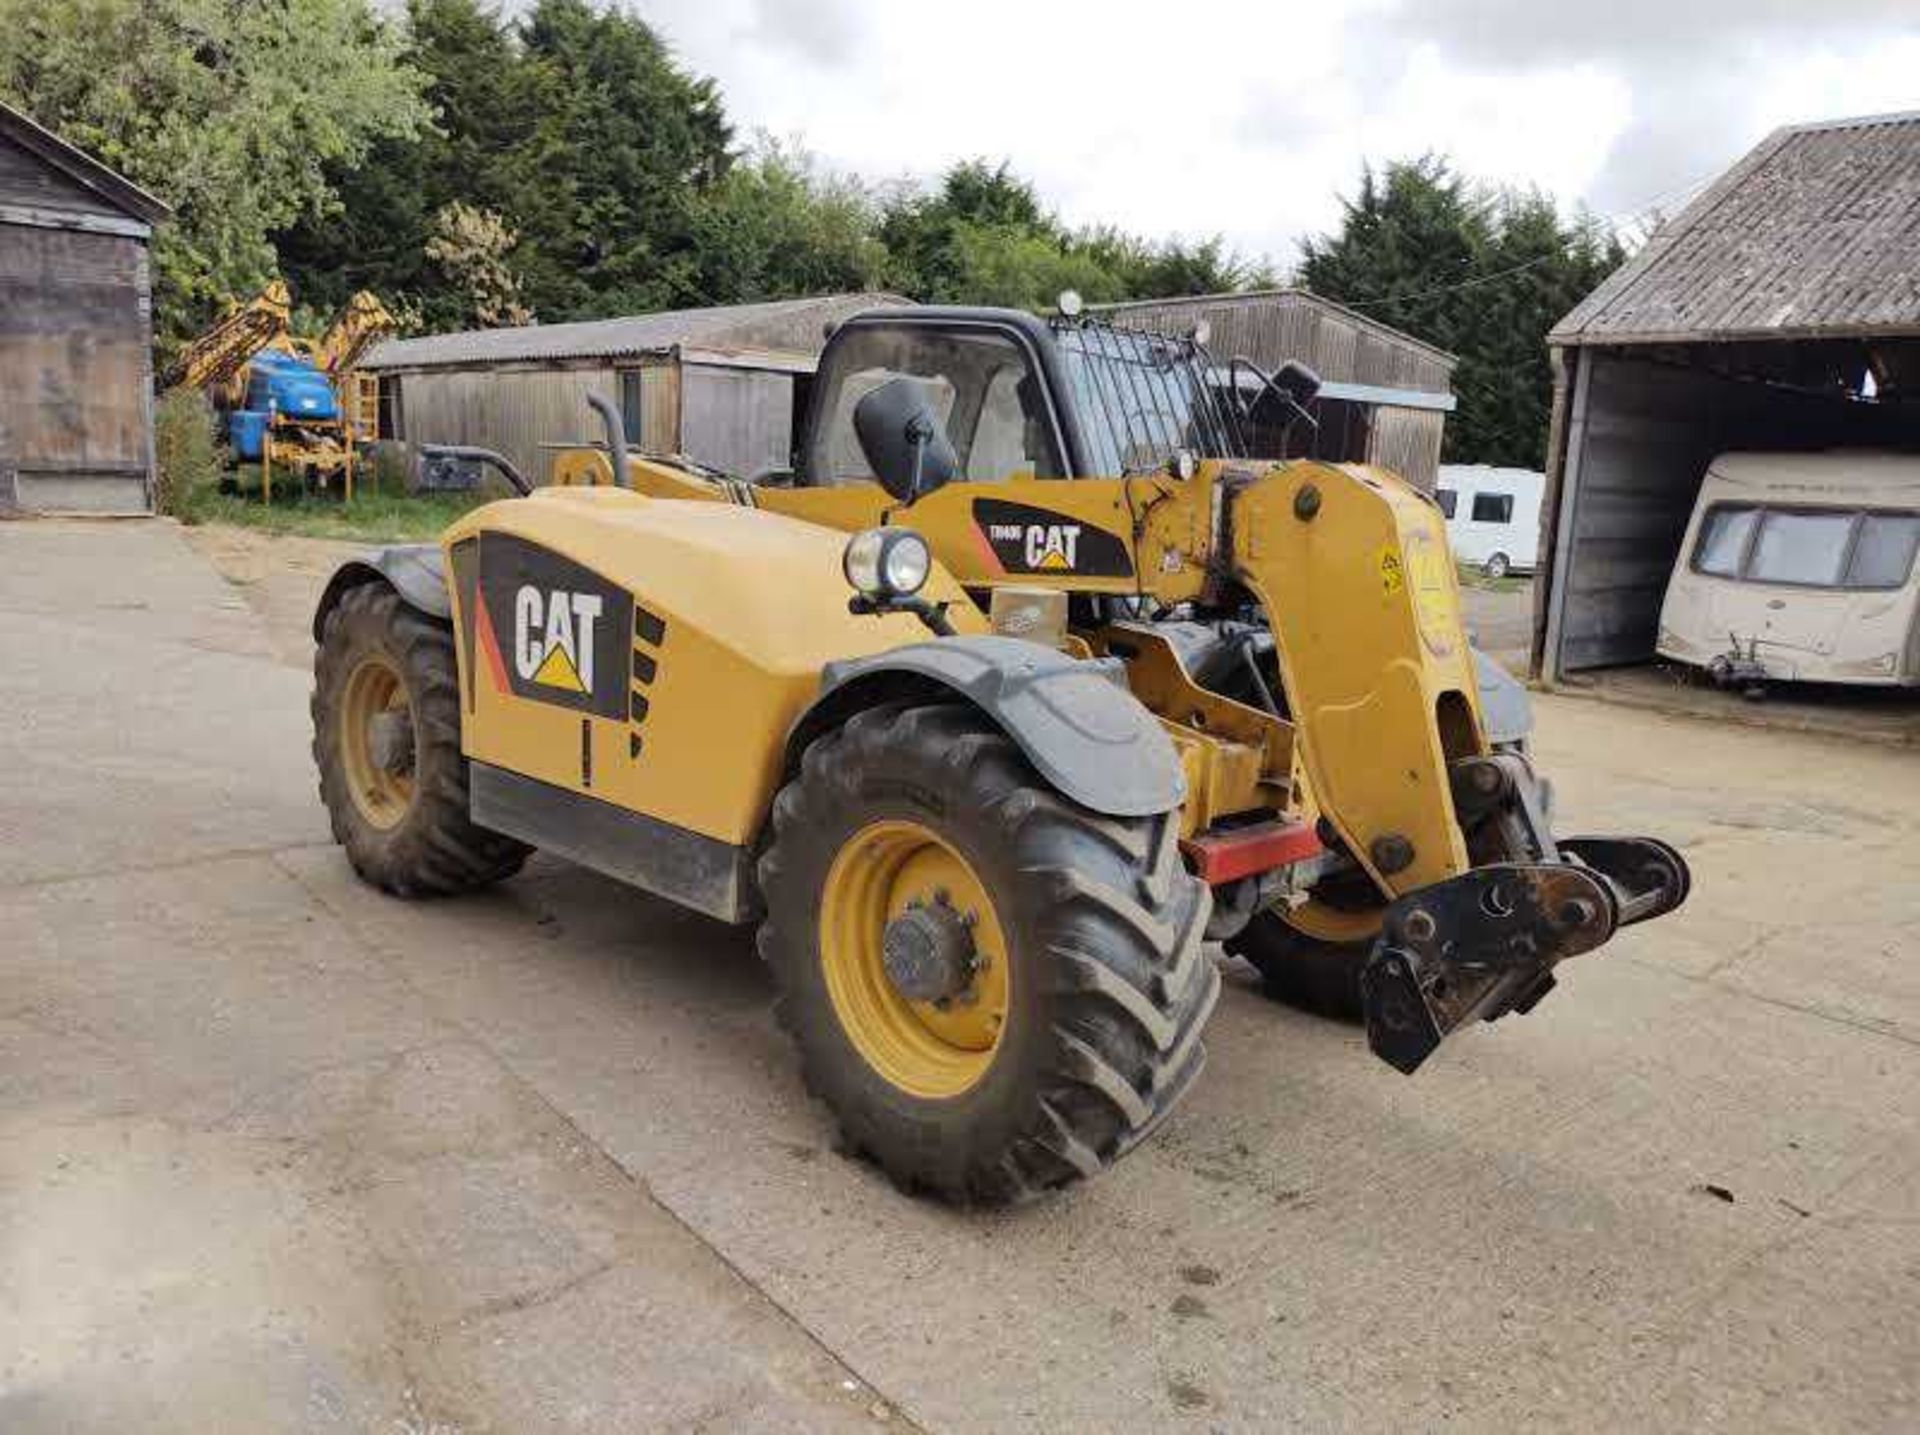 Cat Teleporter TH 406 (Year 2010) 5706 hours. Well serviced in good condition. 4m reach. Reg: AE10